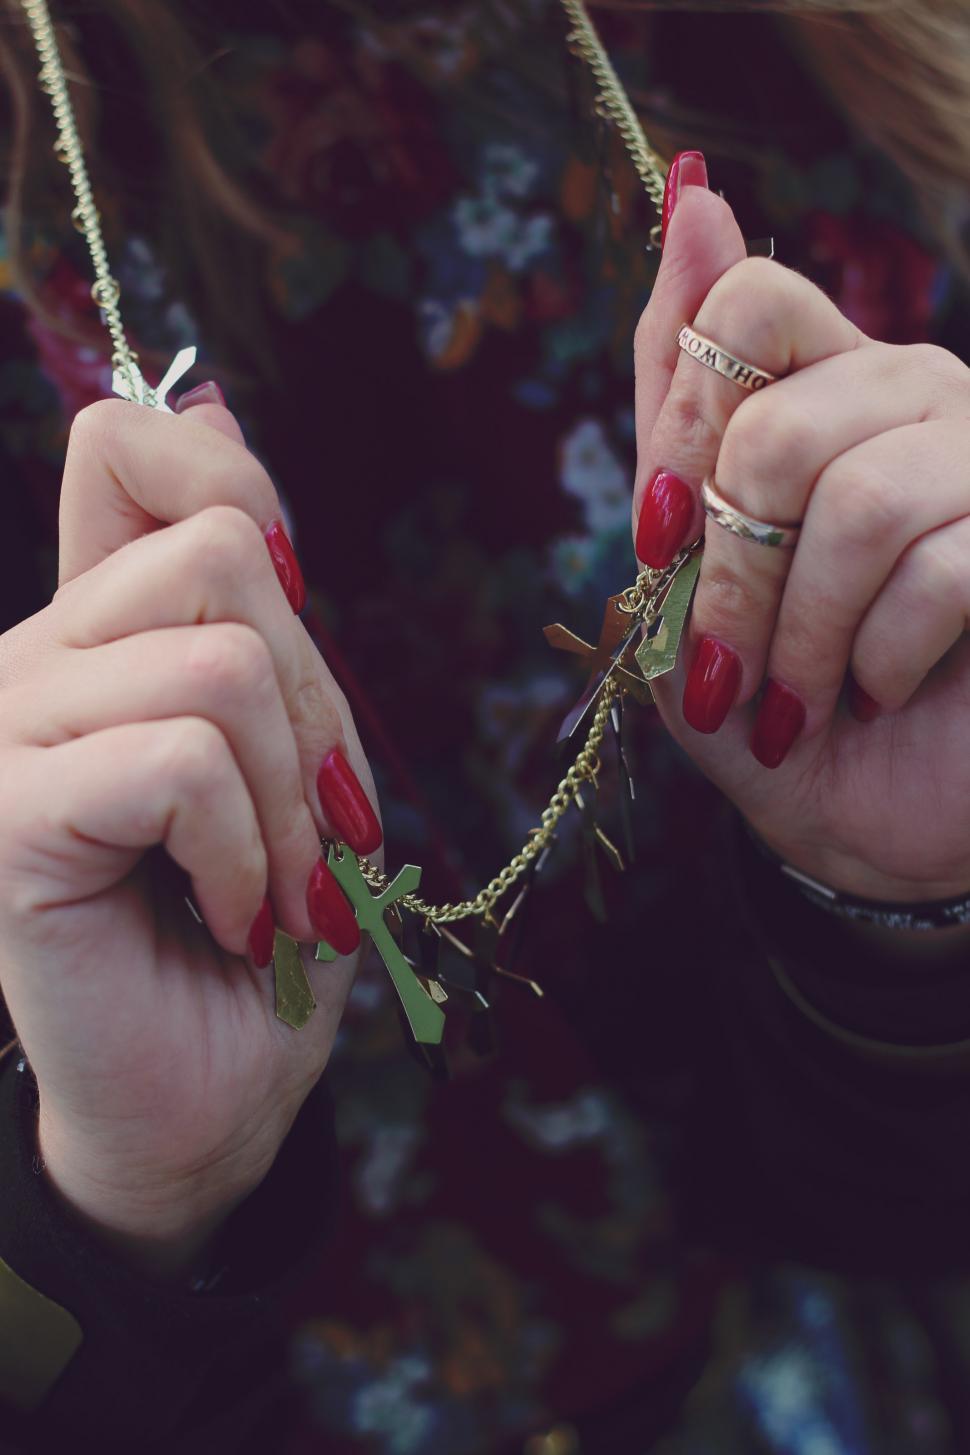 Free Image of Woman With Red Nails Holding Onto a Chain 